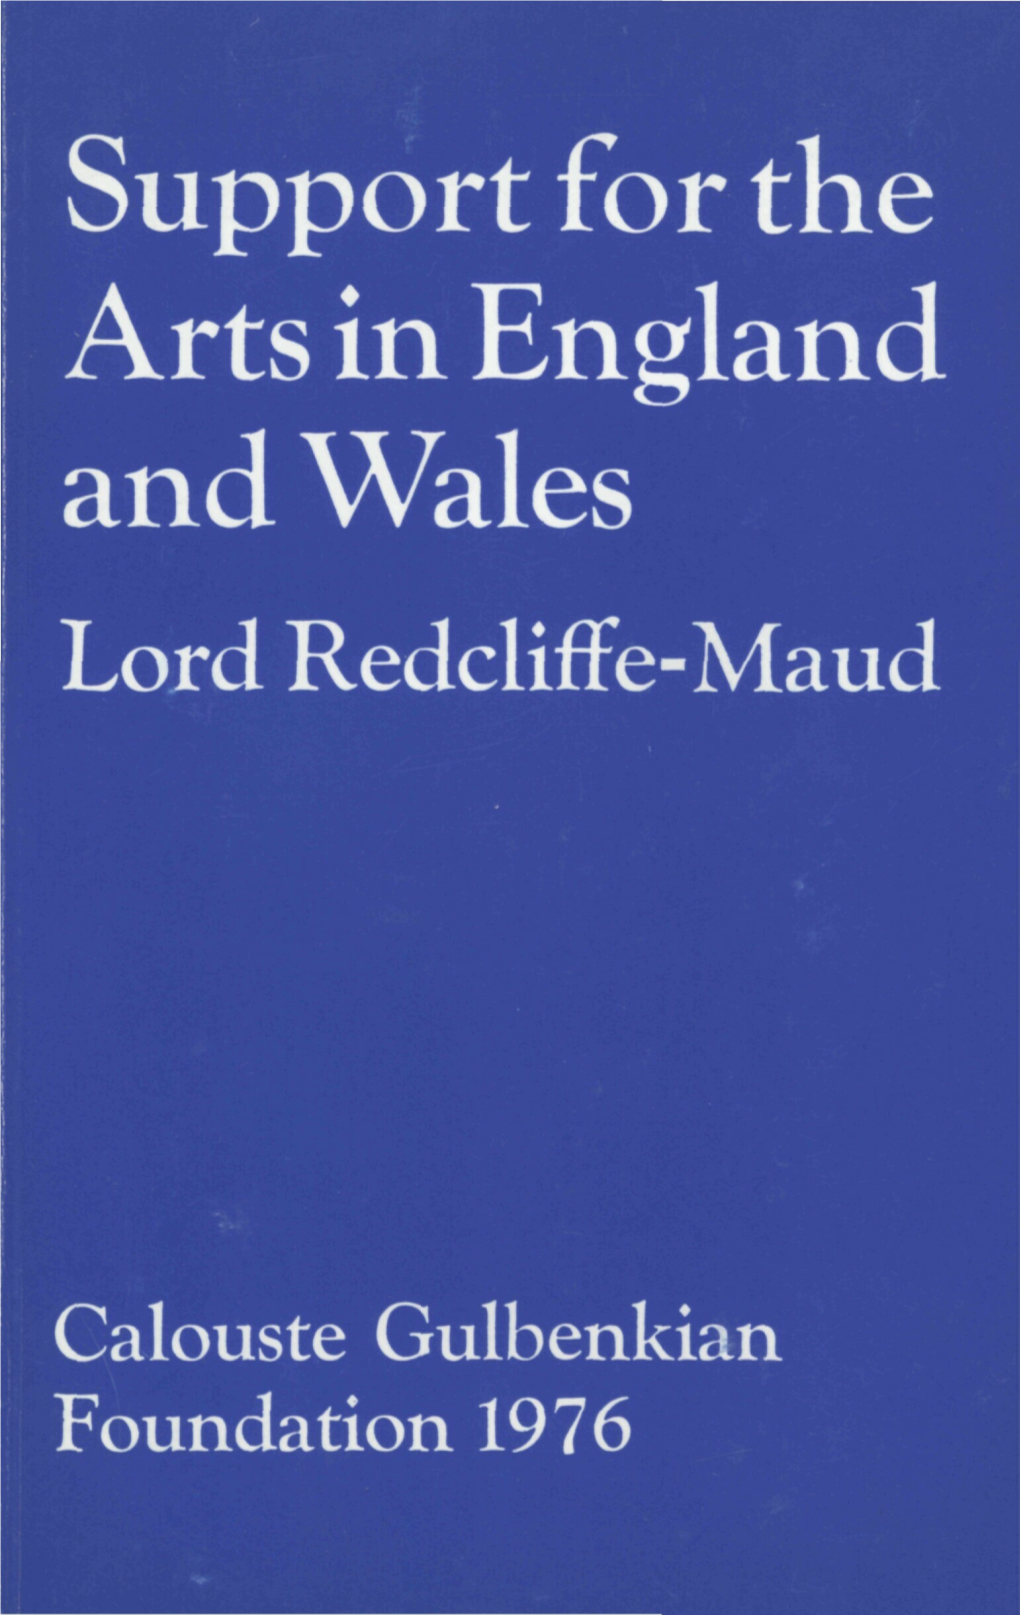 Support for the Arts in England and Wales Lord Redcliffe-Maud